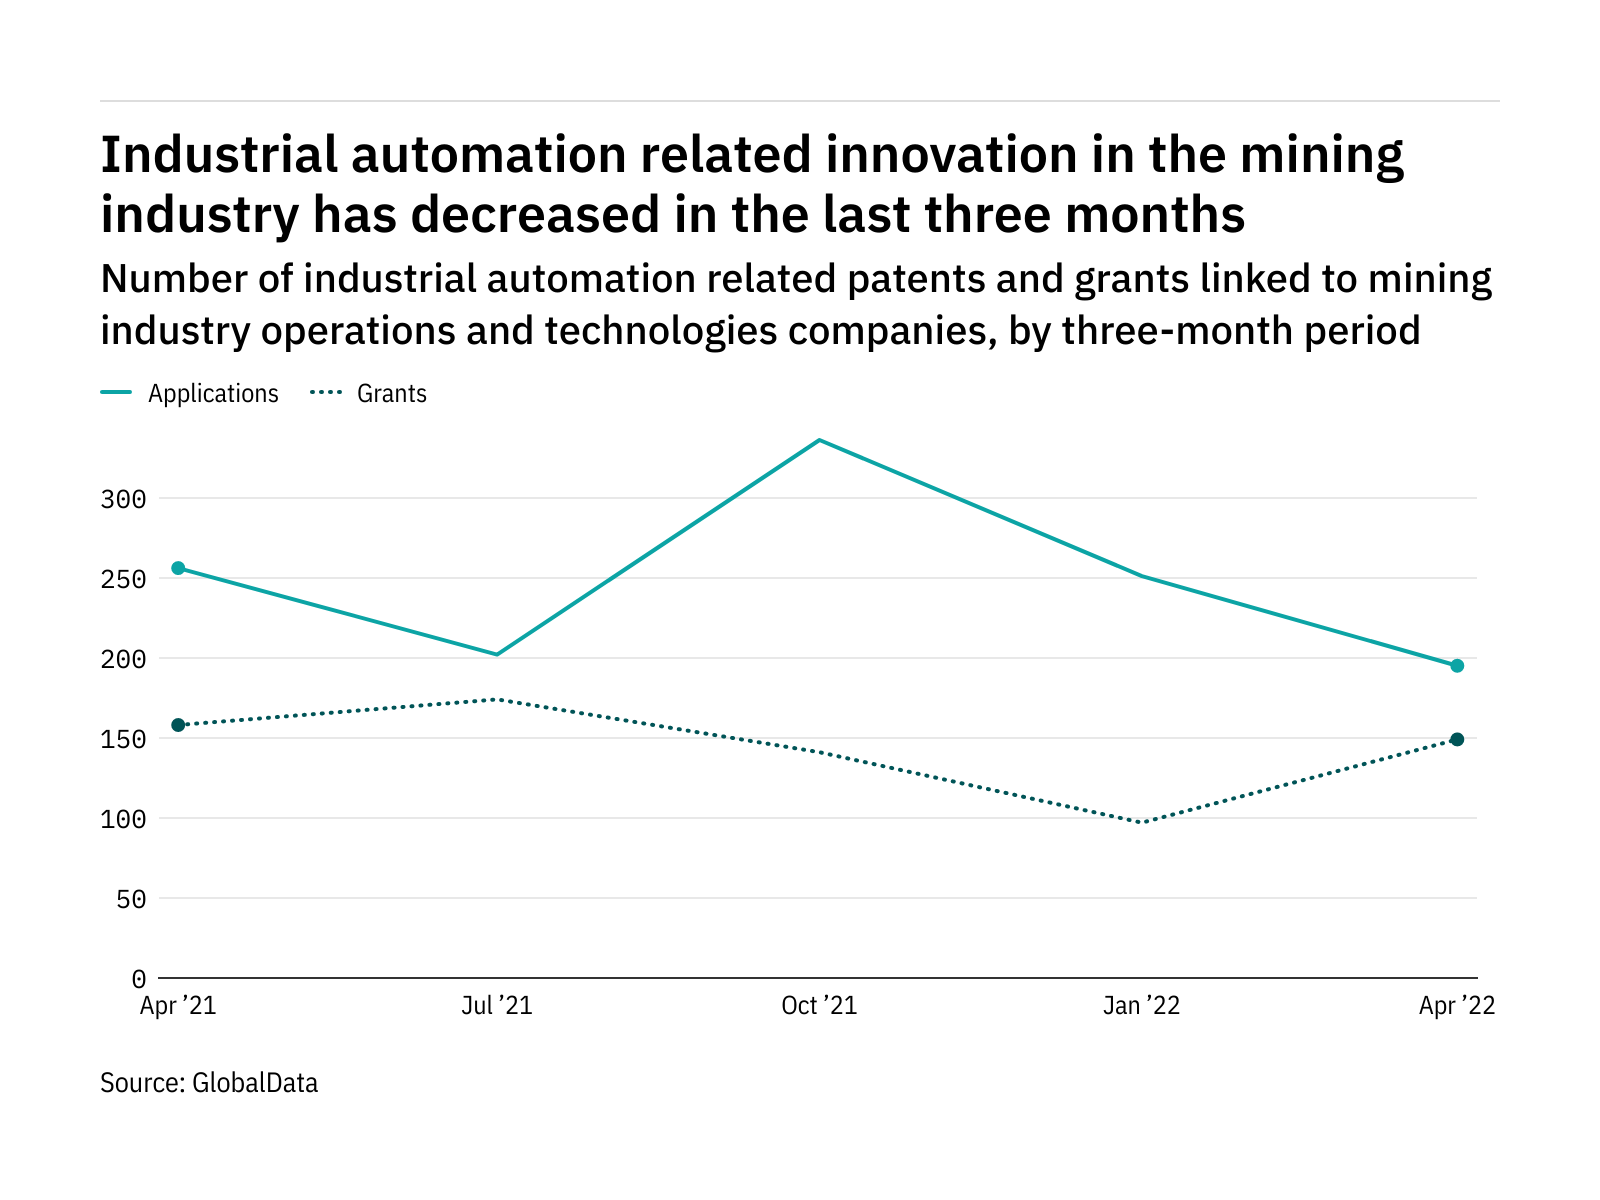 Industrial automation innovation among mining industry companies has dropped off in the last year